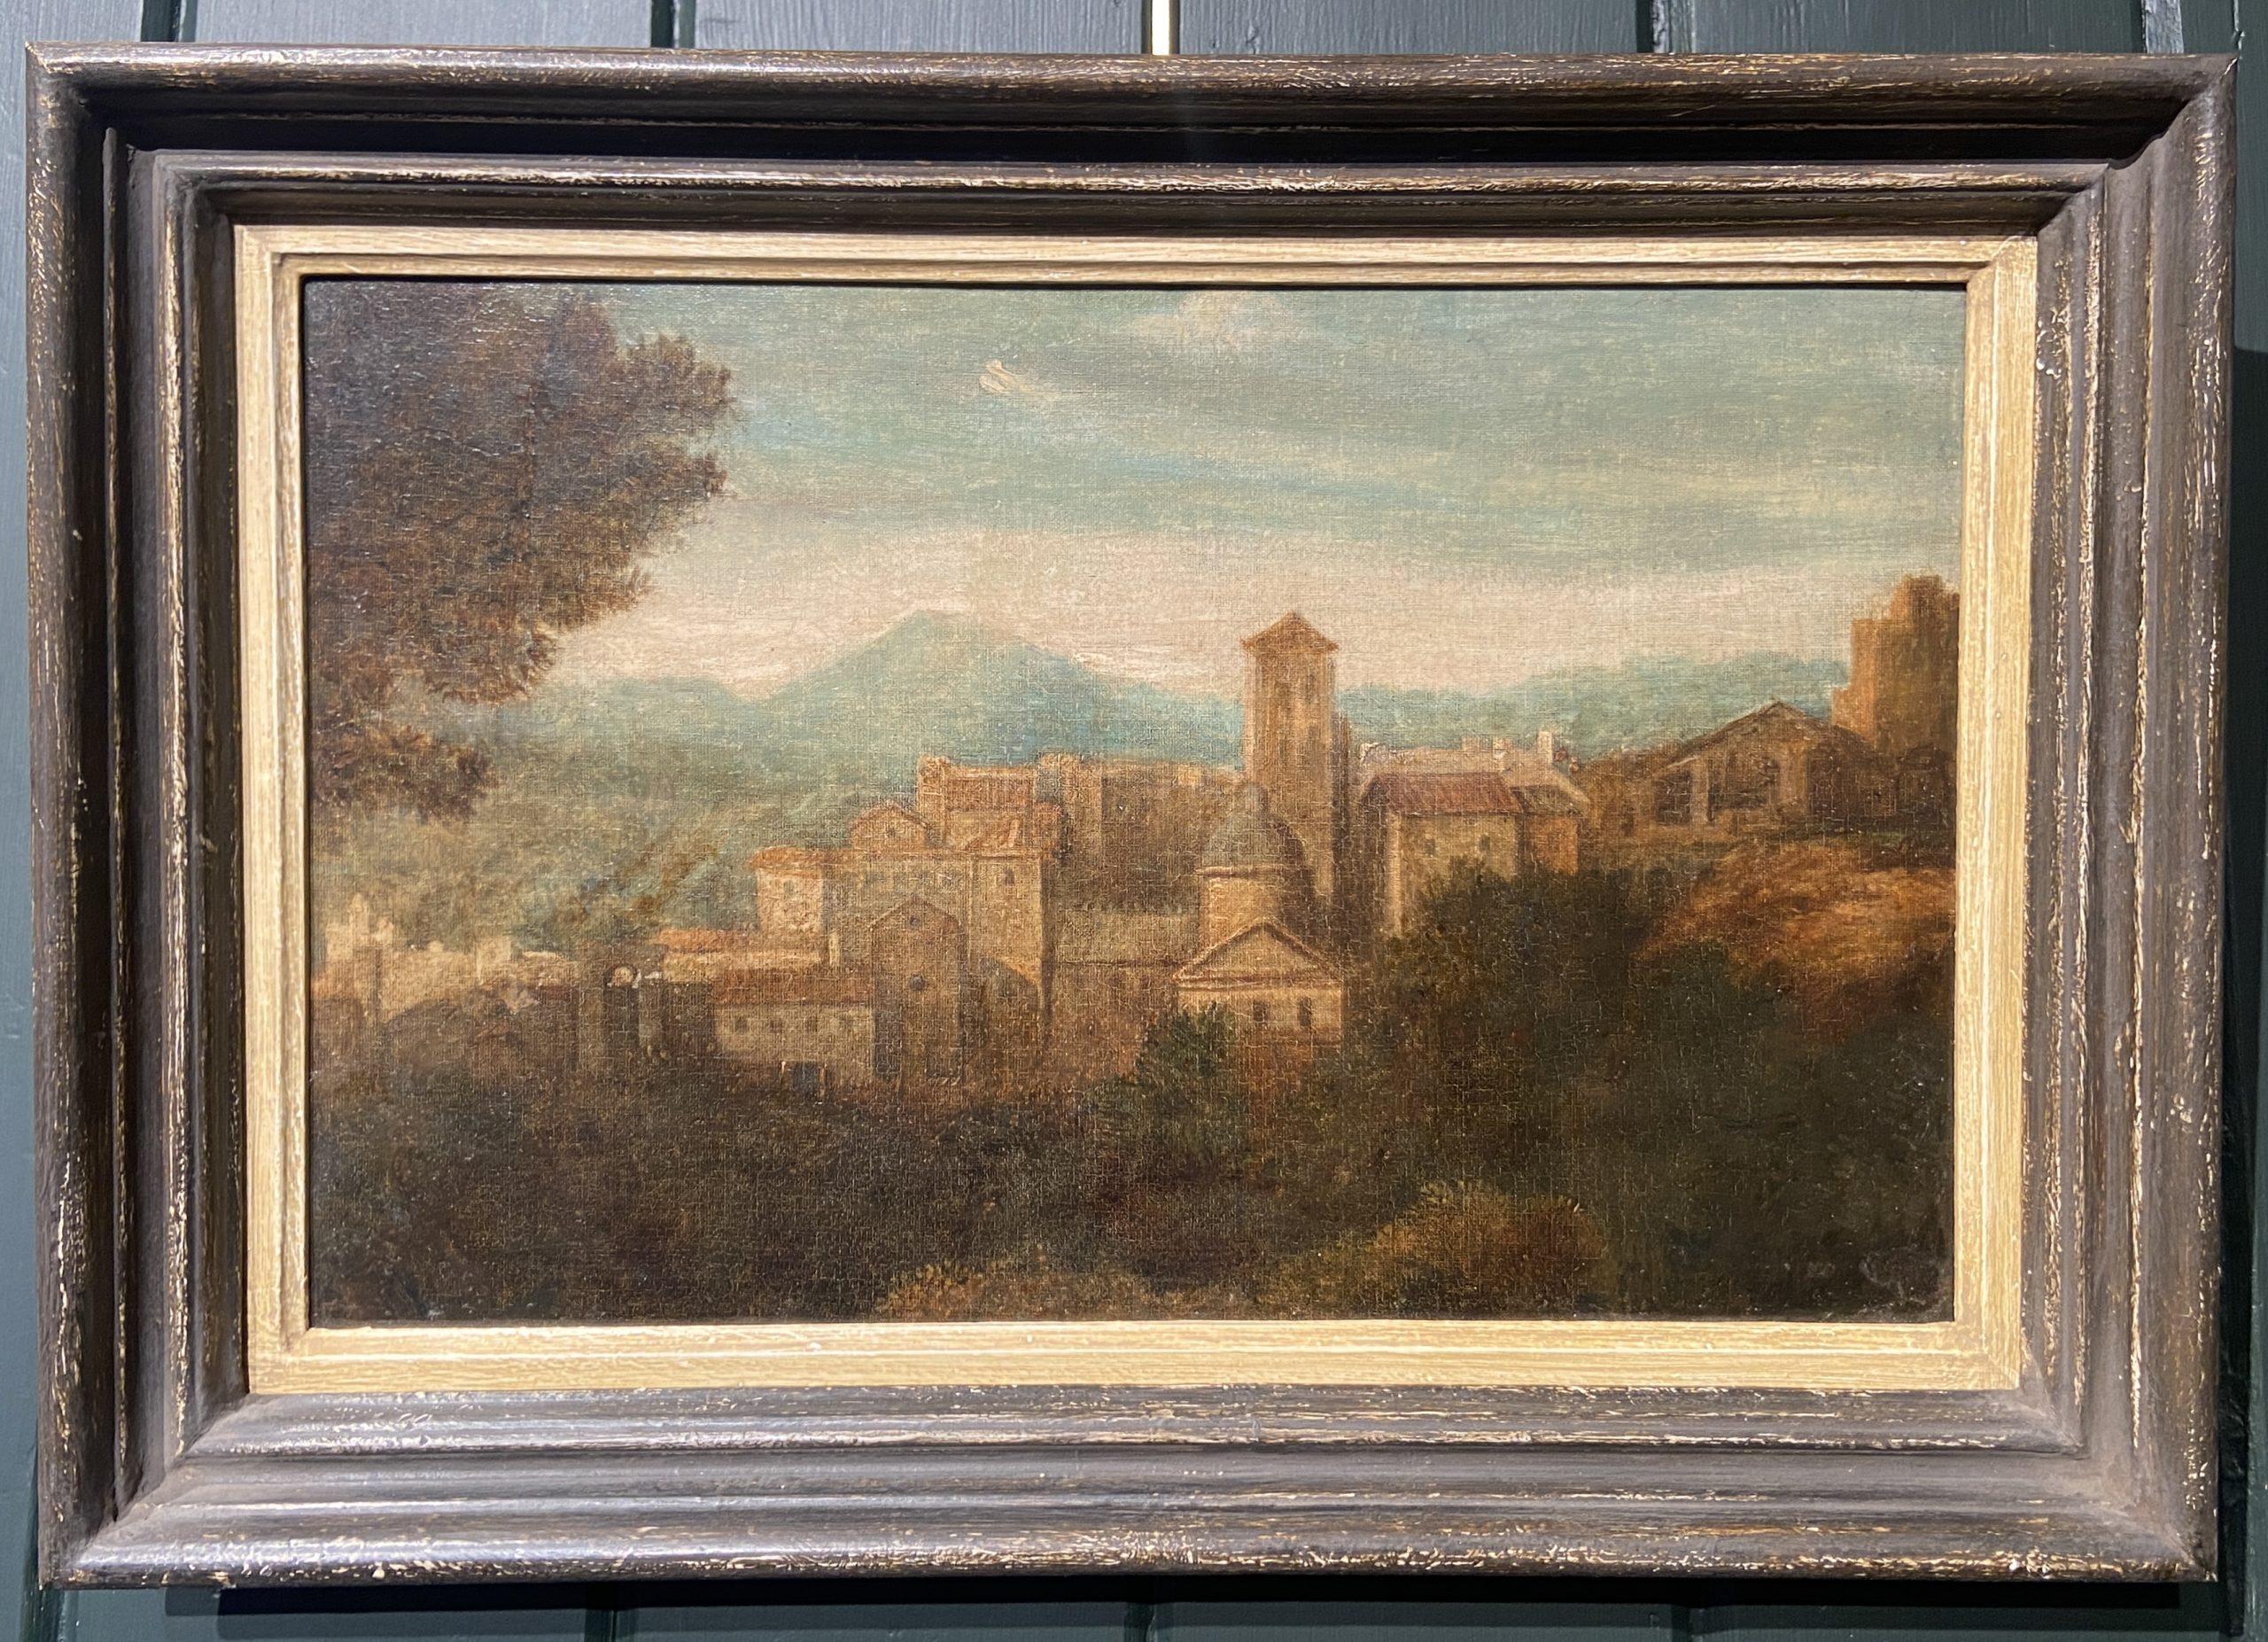 Oil on board
Image size: 13 1/2 x 9 inches (34.25 x 23 cm)
Hand made contemporary style frame

This is a classic Italian landscape painted in an academic style, taking inspiration from the Roman Campagna. This landscape, with its recession through a